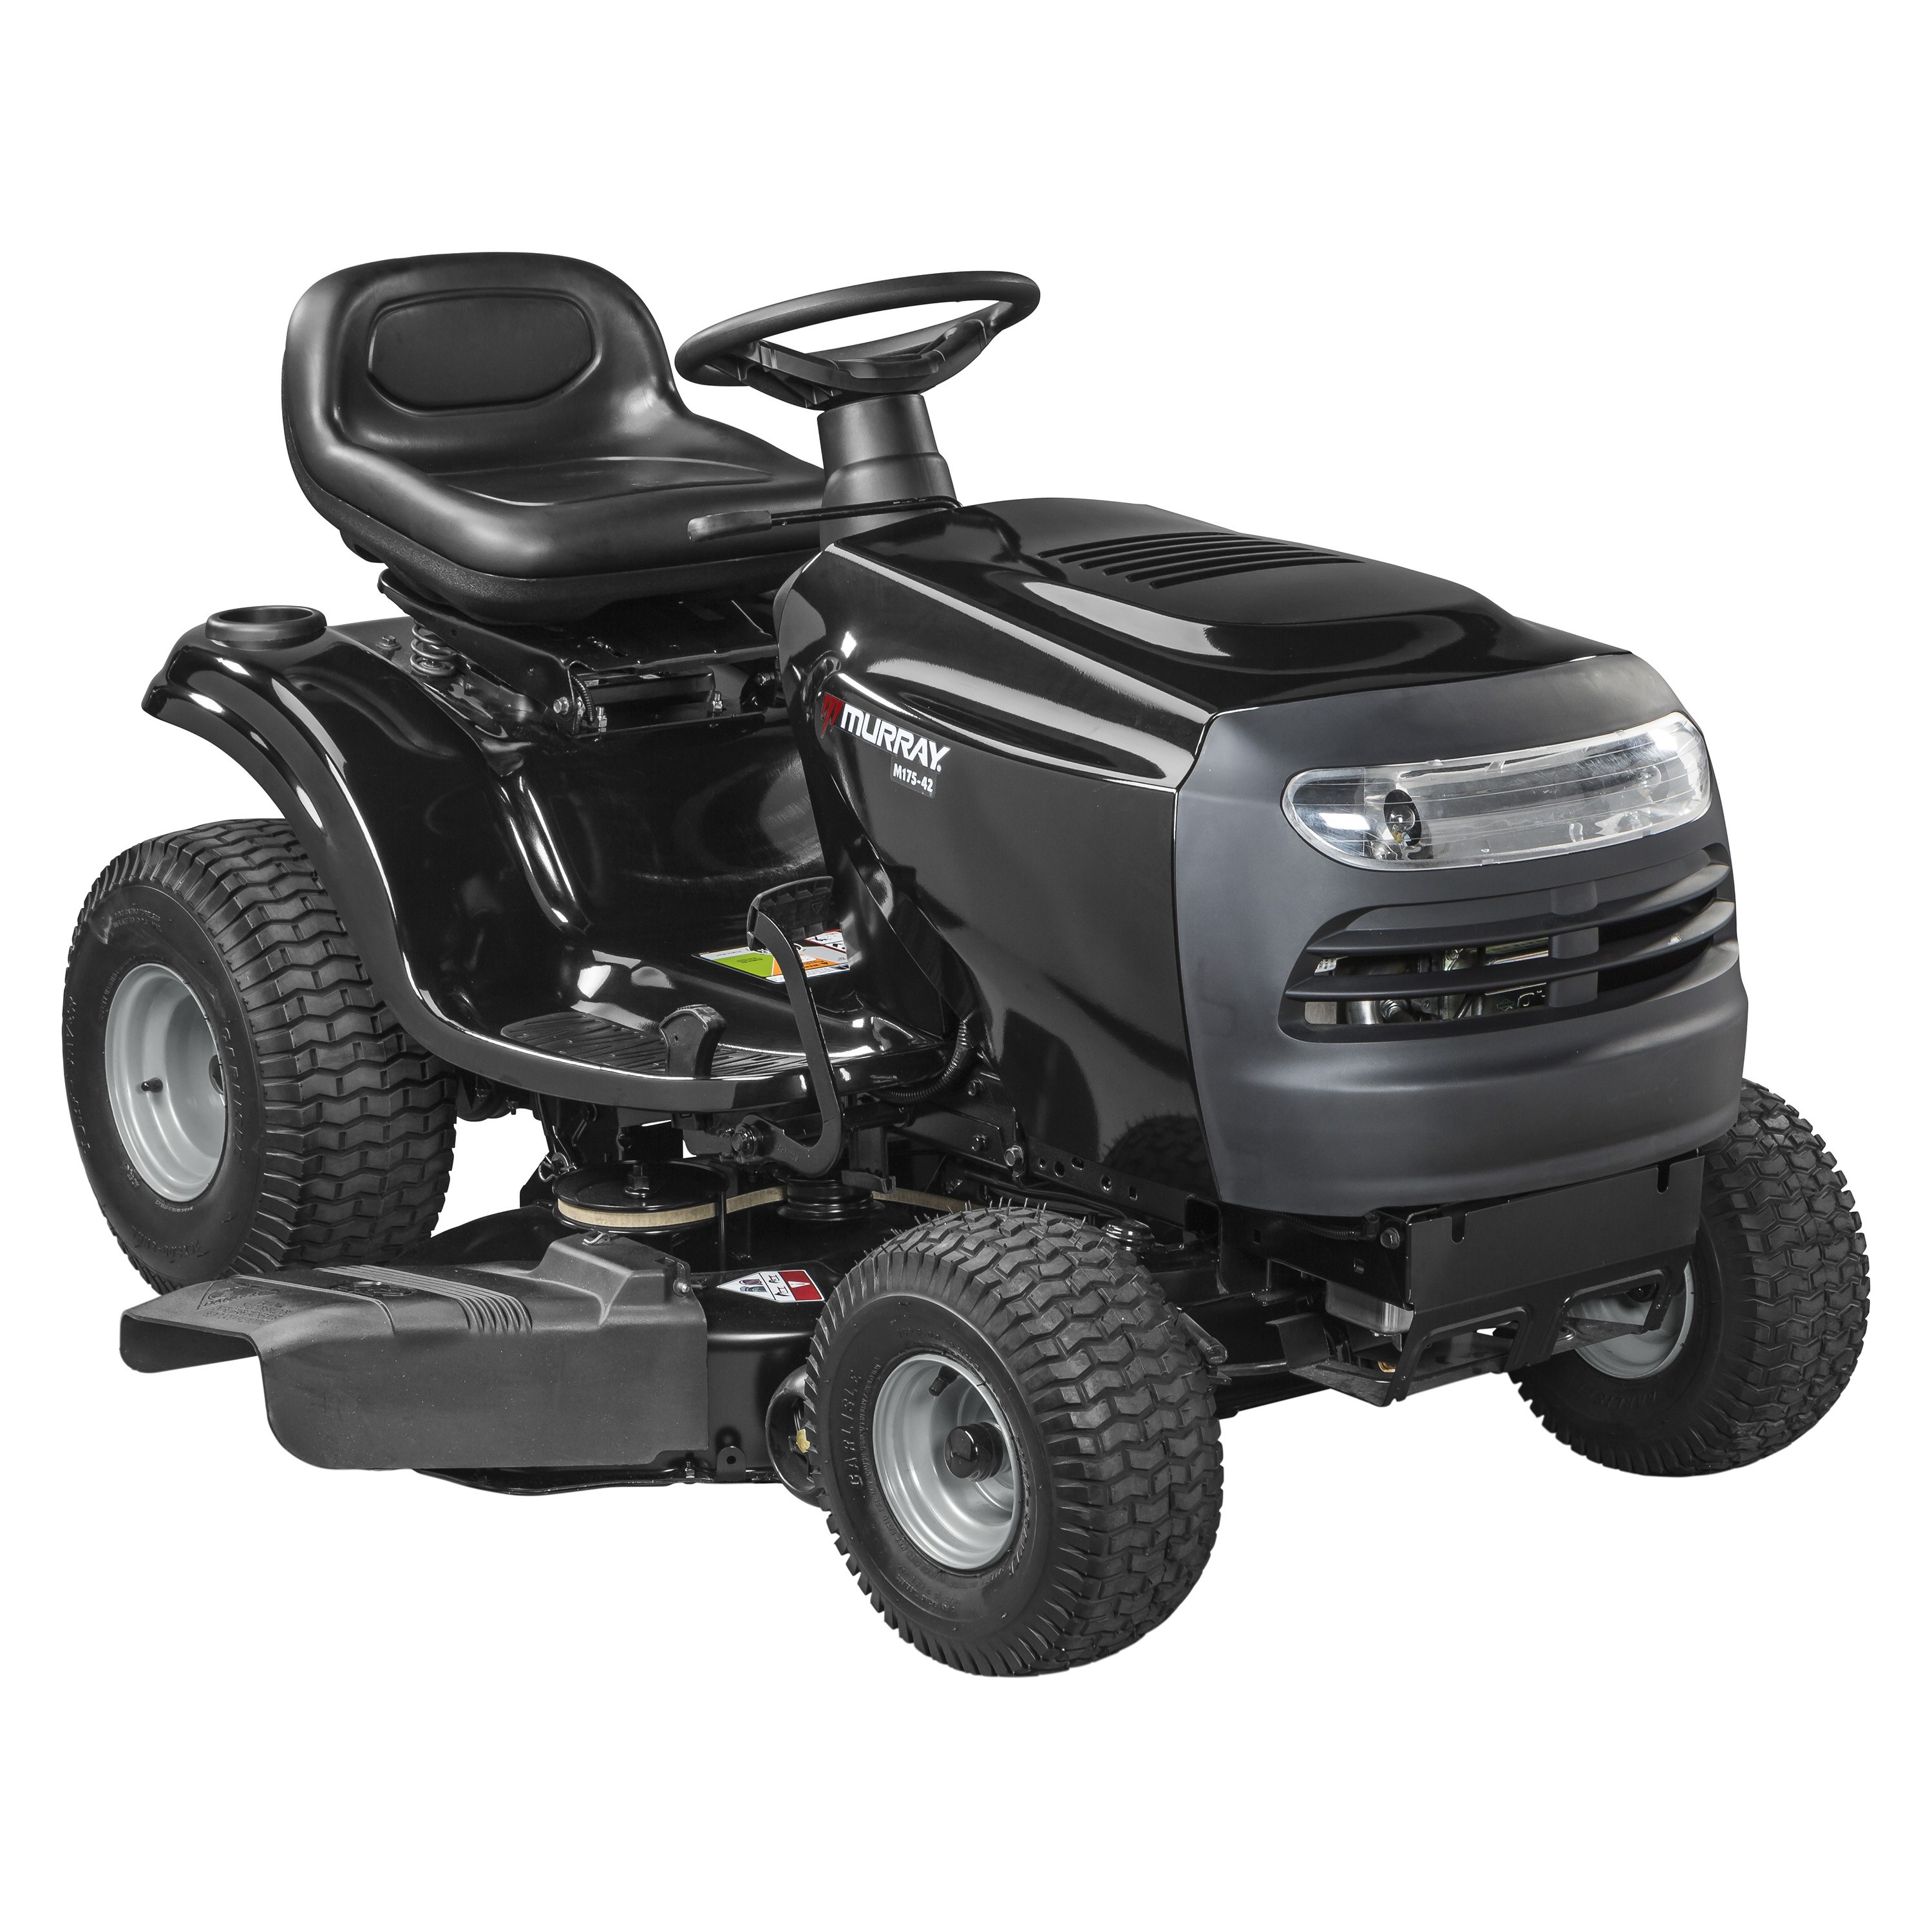 17.5 Hp Briggs and Stratton End Play Murray 42 In 17 5 Hp Briggs & Stratton Riding Mower Walmart Of 17.5 Hp Briggs and Stratton End Play